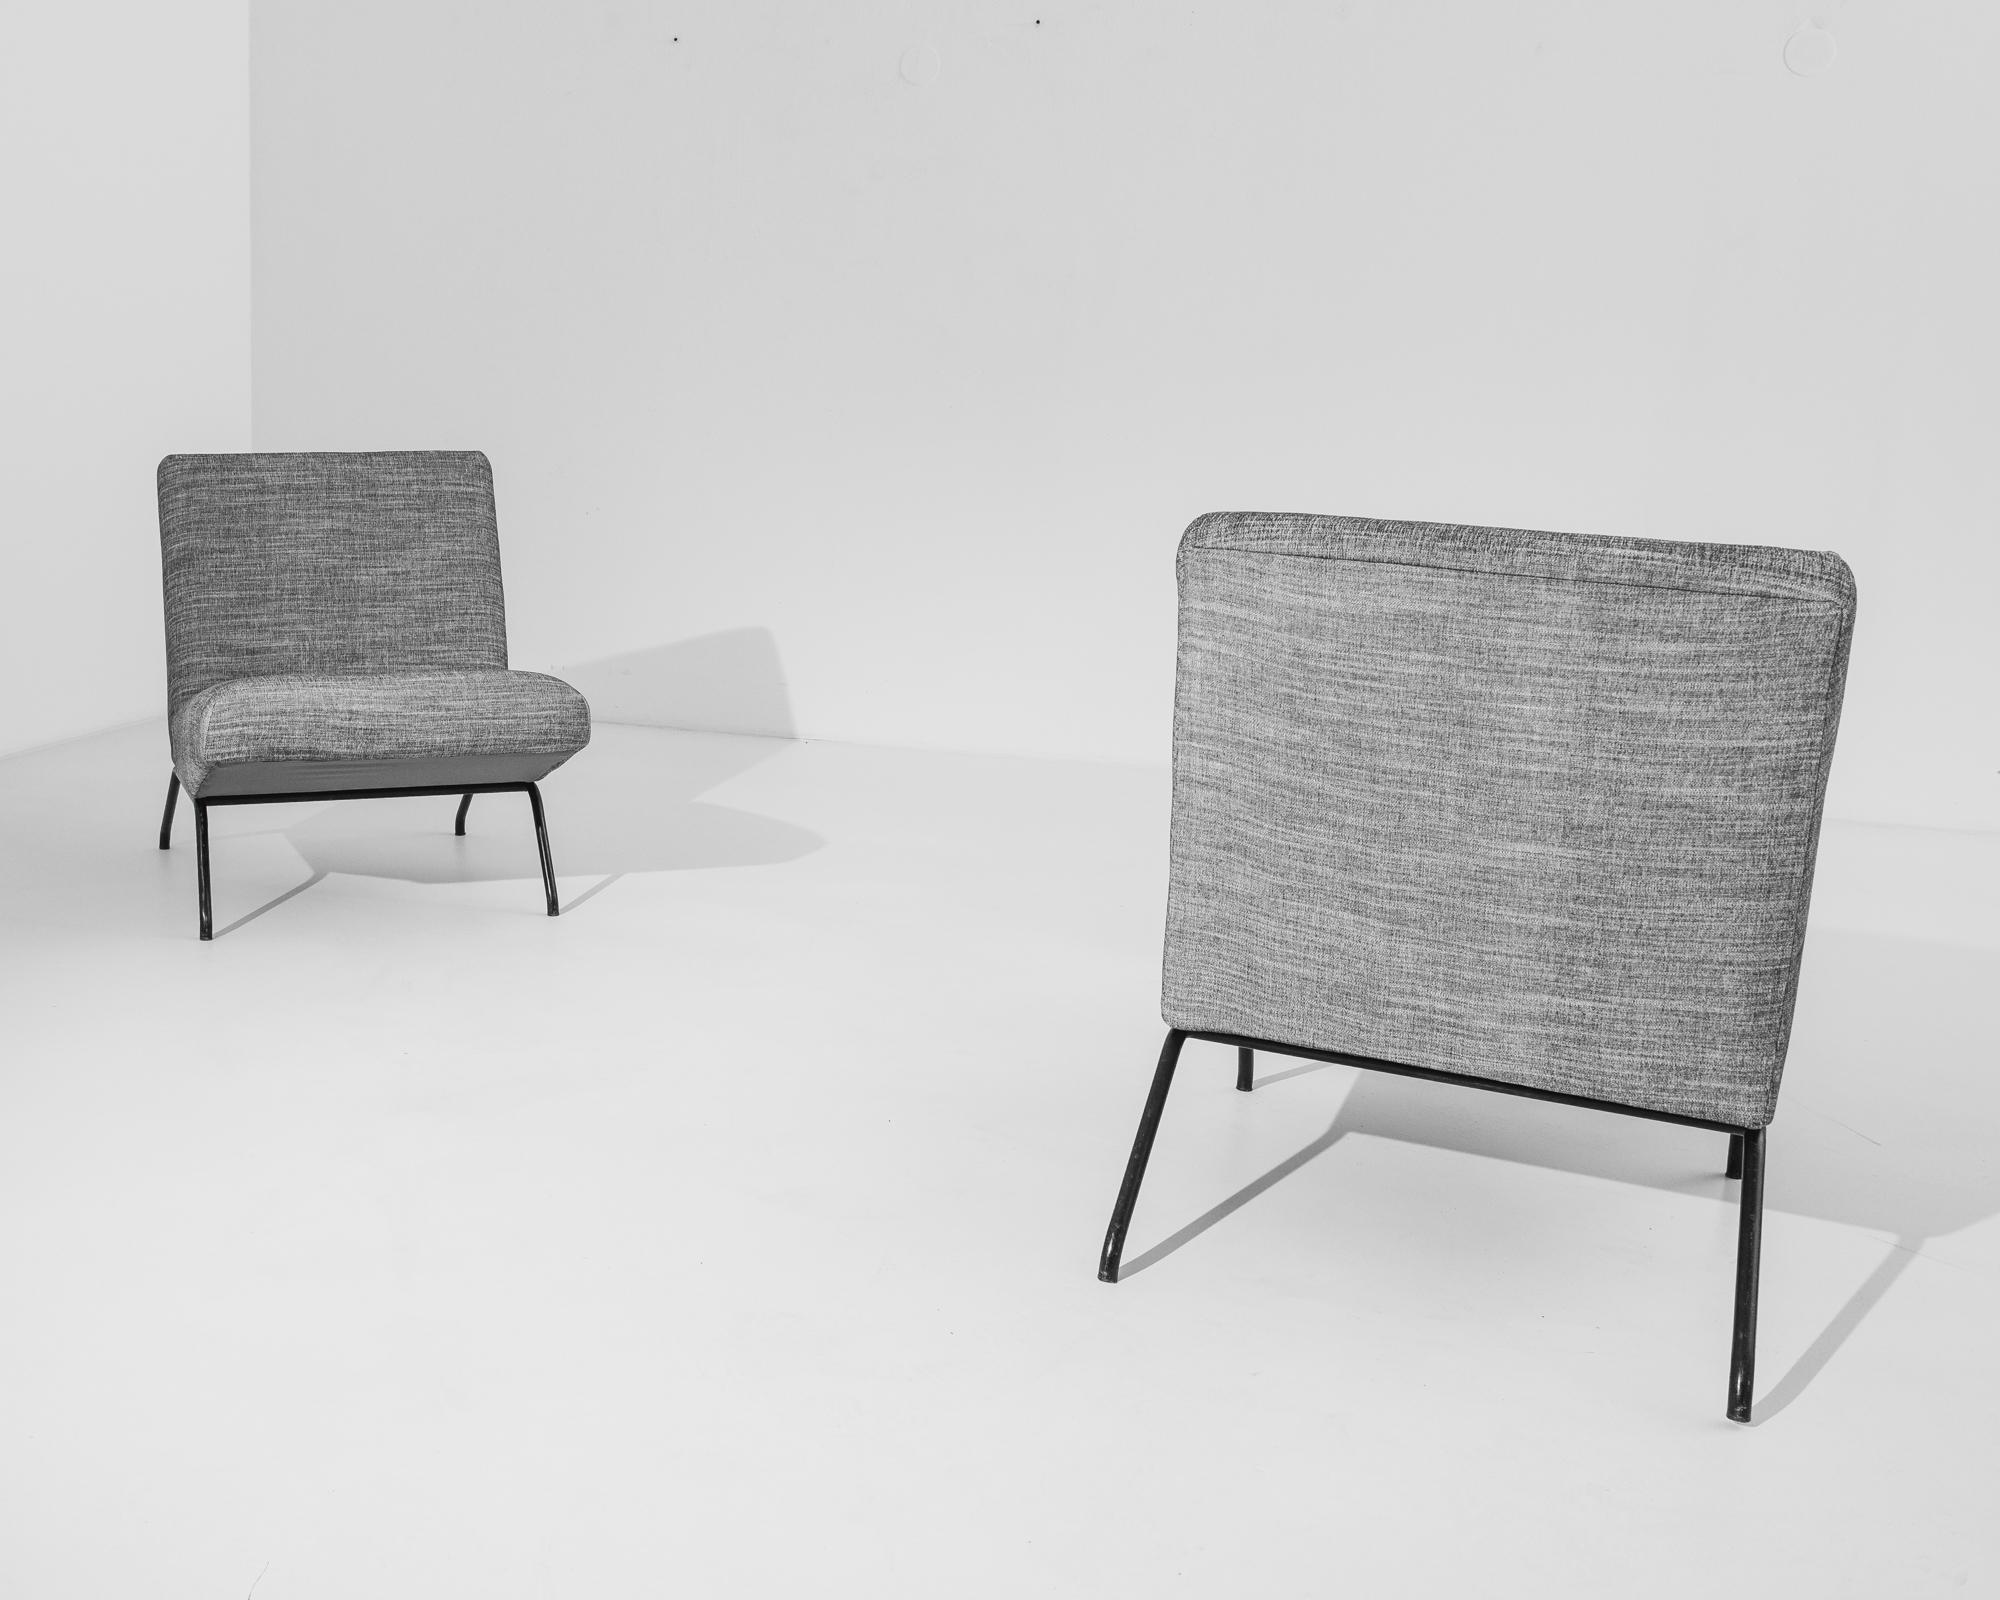 A pair of French mid-century armchairs circa 1960. Upholstered in elegant grey, these modernist chairs feature comfortable, slightly angular seats held up by slender metallic legs of black color. The absence of armrests accentuates their quirky